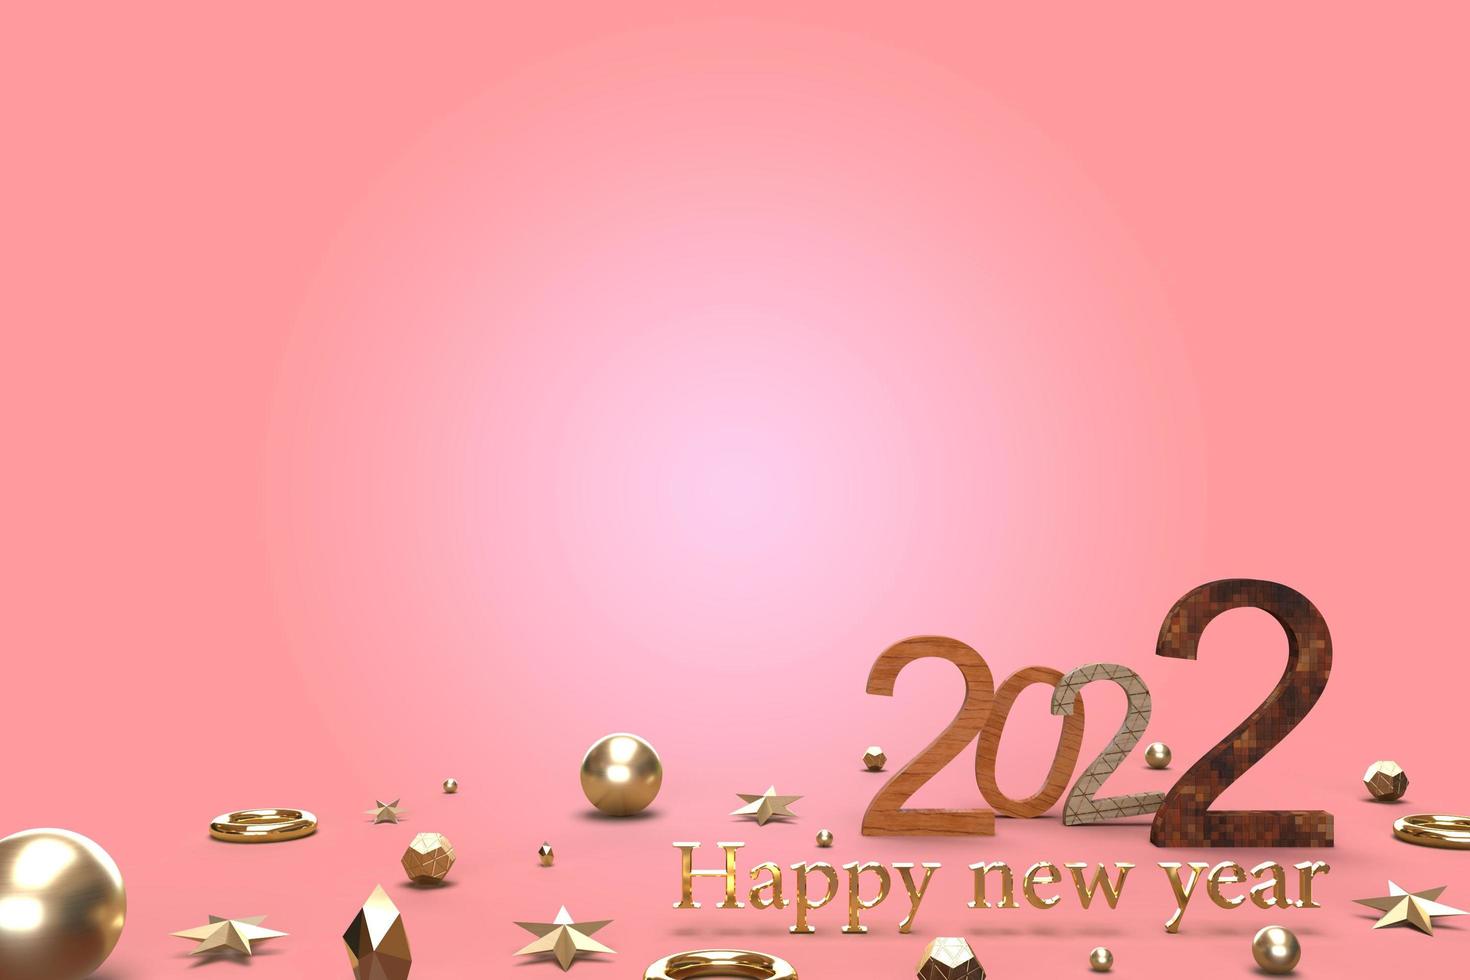 Happy new year 2022 poster. 3d illustration 3d rendering. year 2022 poster. 2022 post. new year background. photo